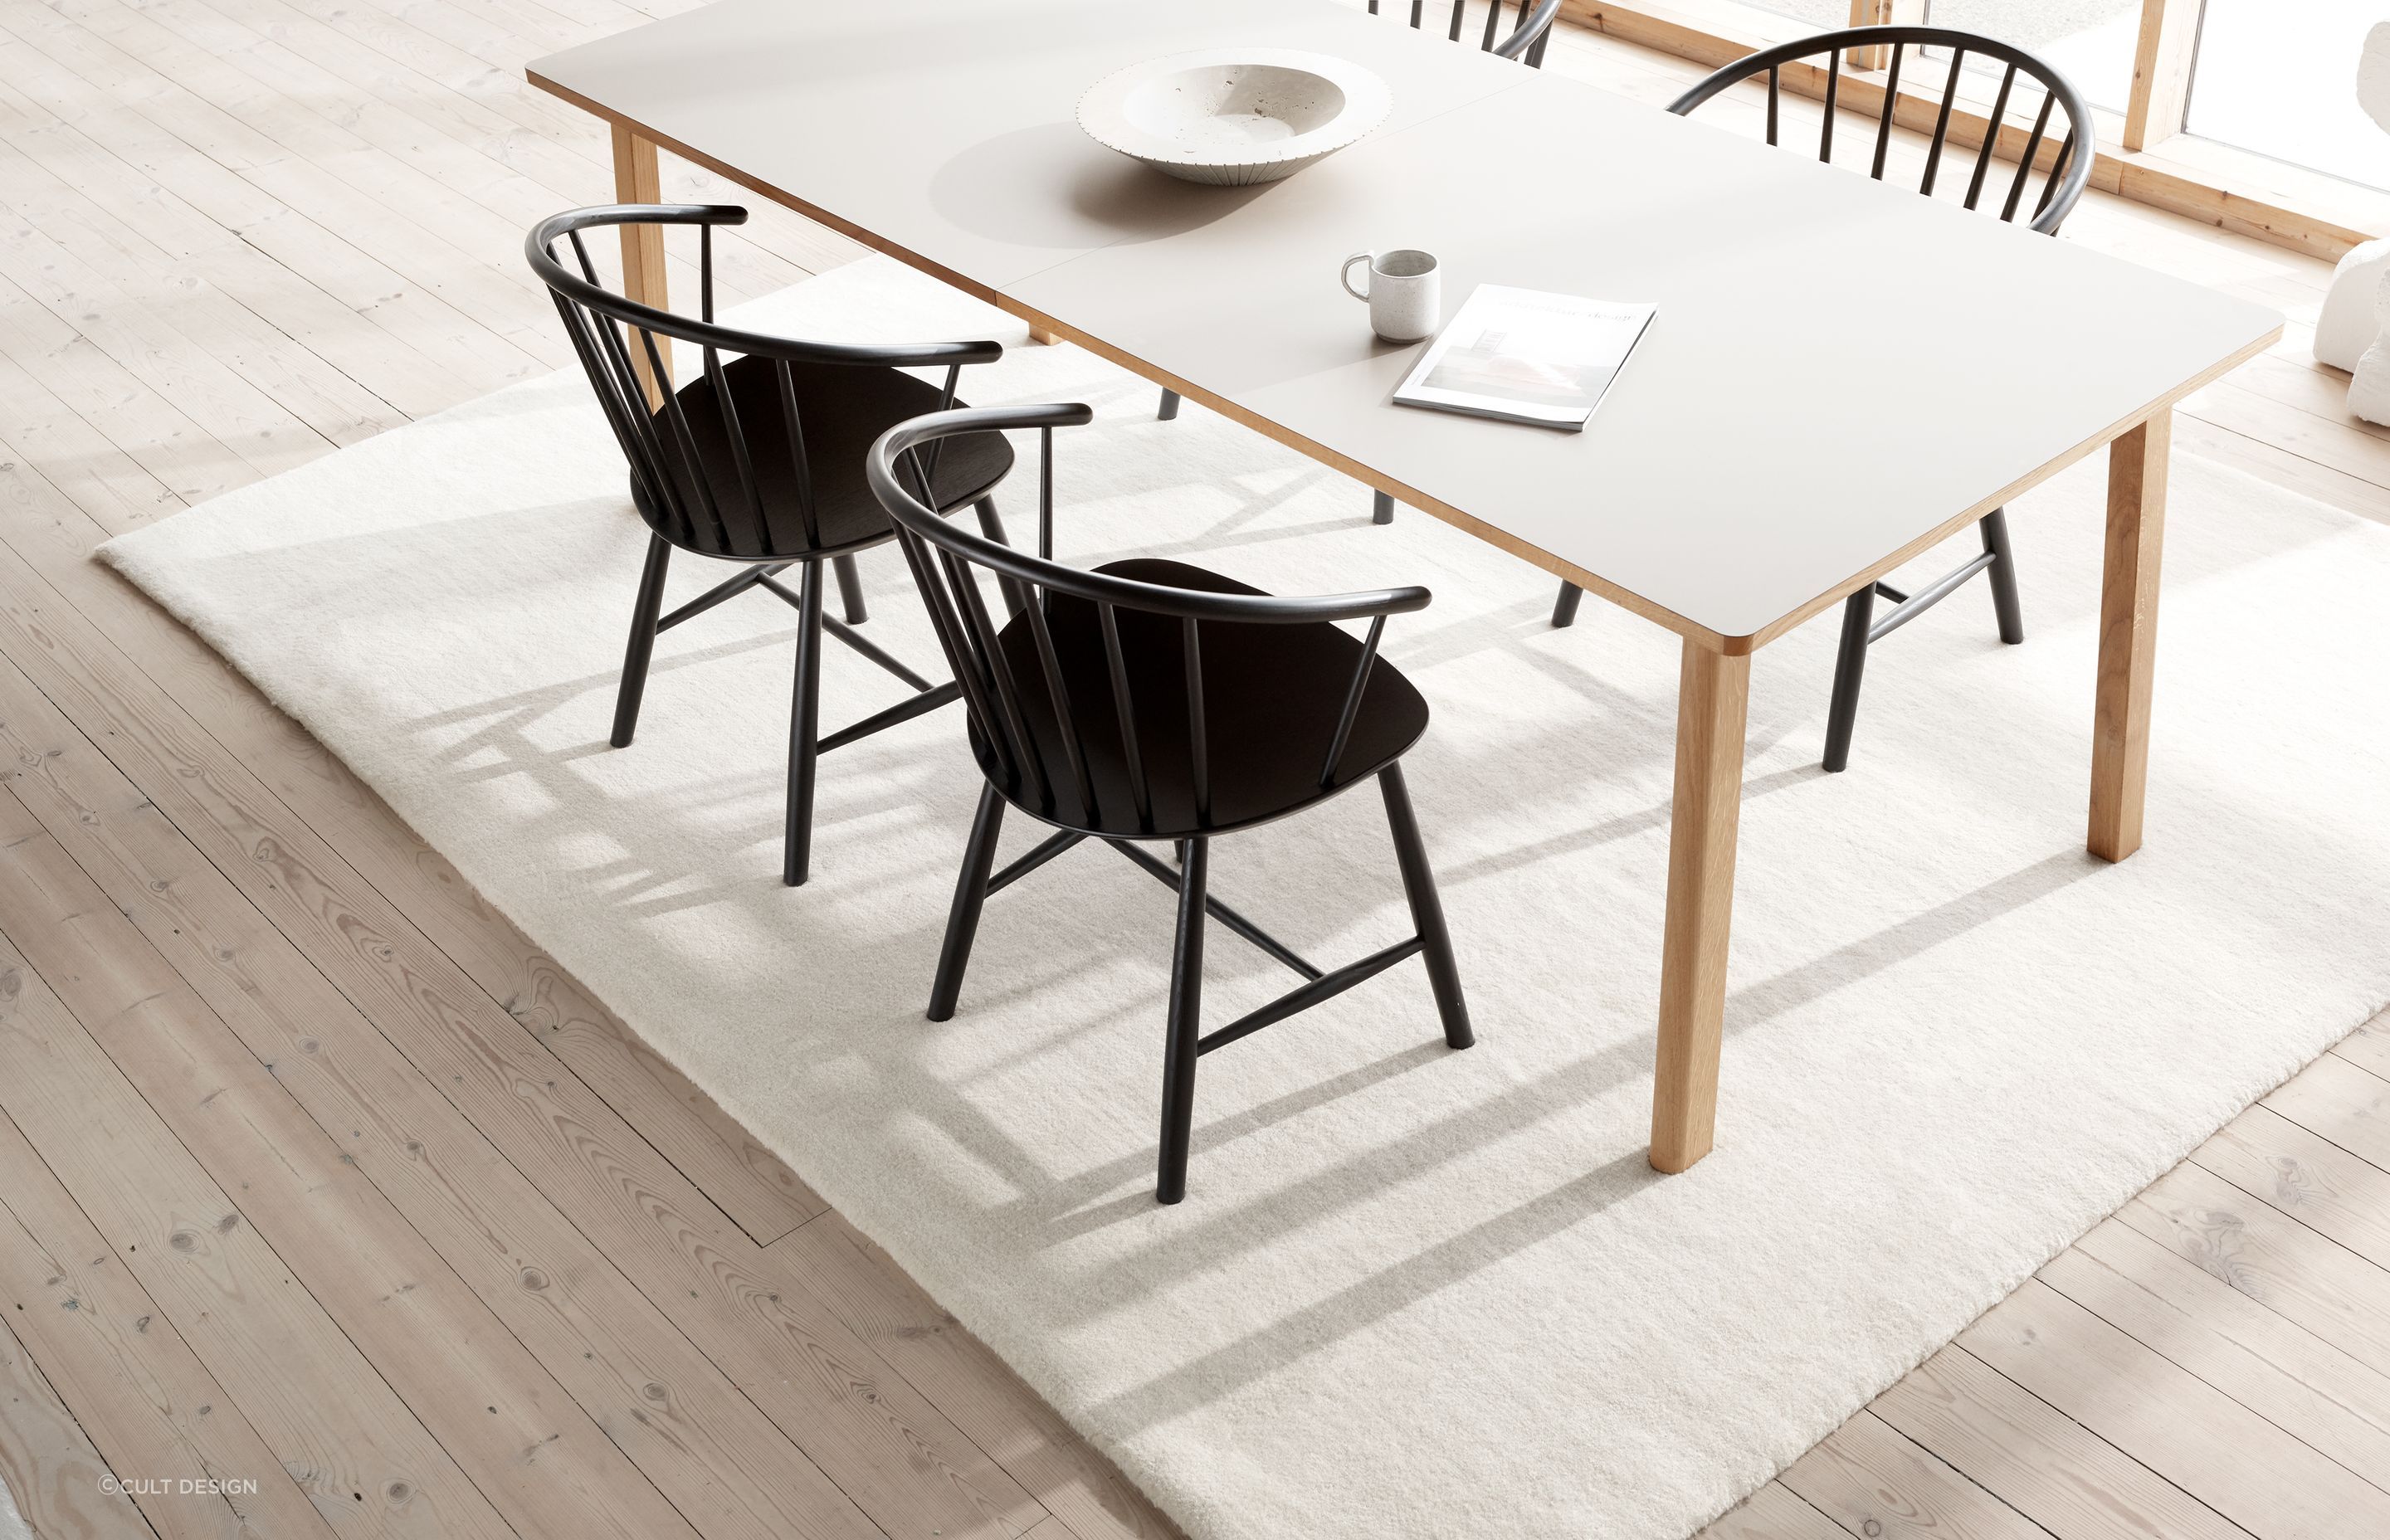 The right size rug won’t dominate a space, neither will it look awkward. Featured product: Ana Dining Table by Fredericia.